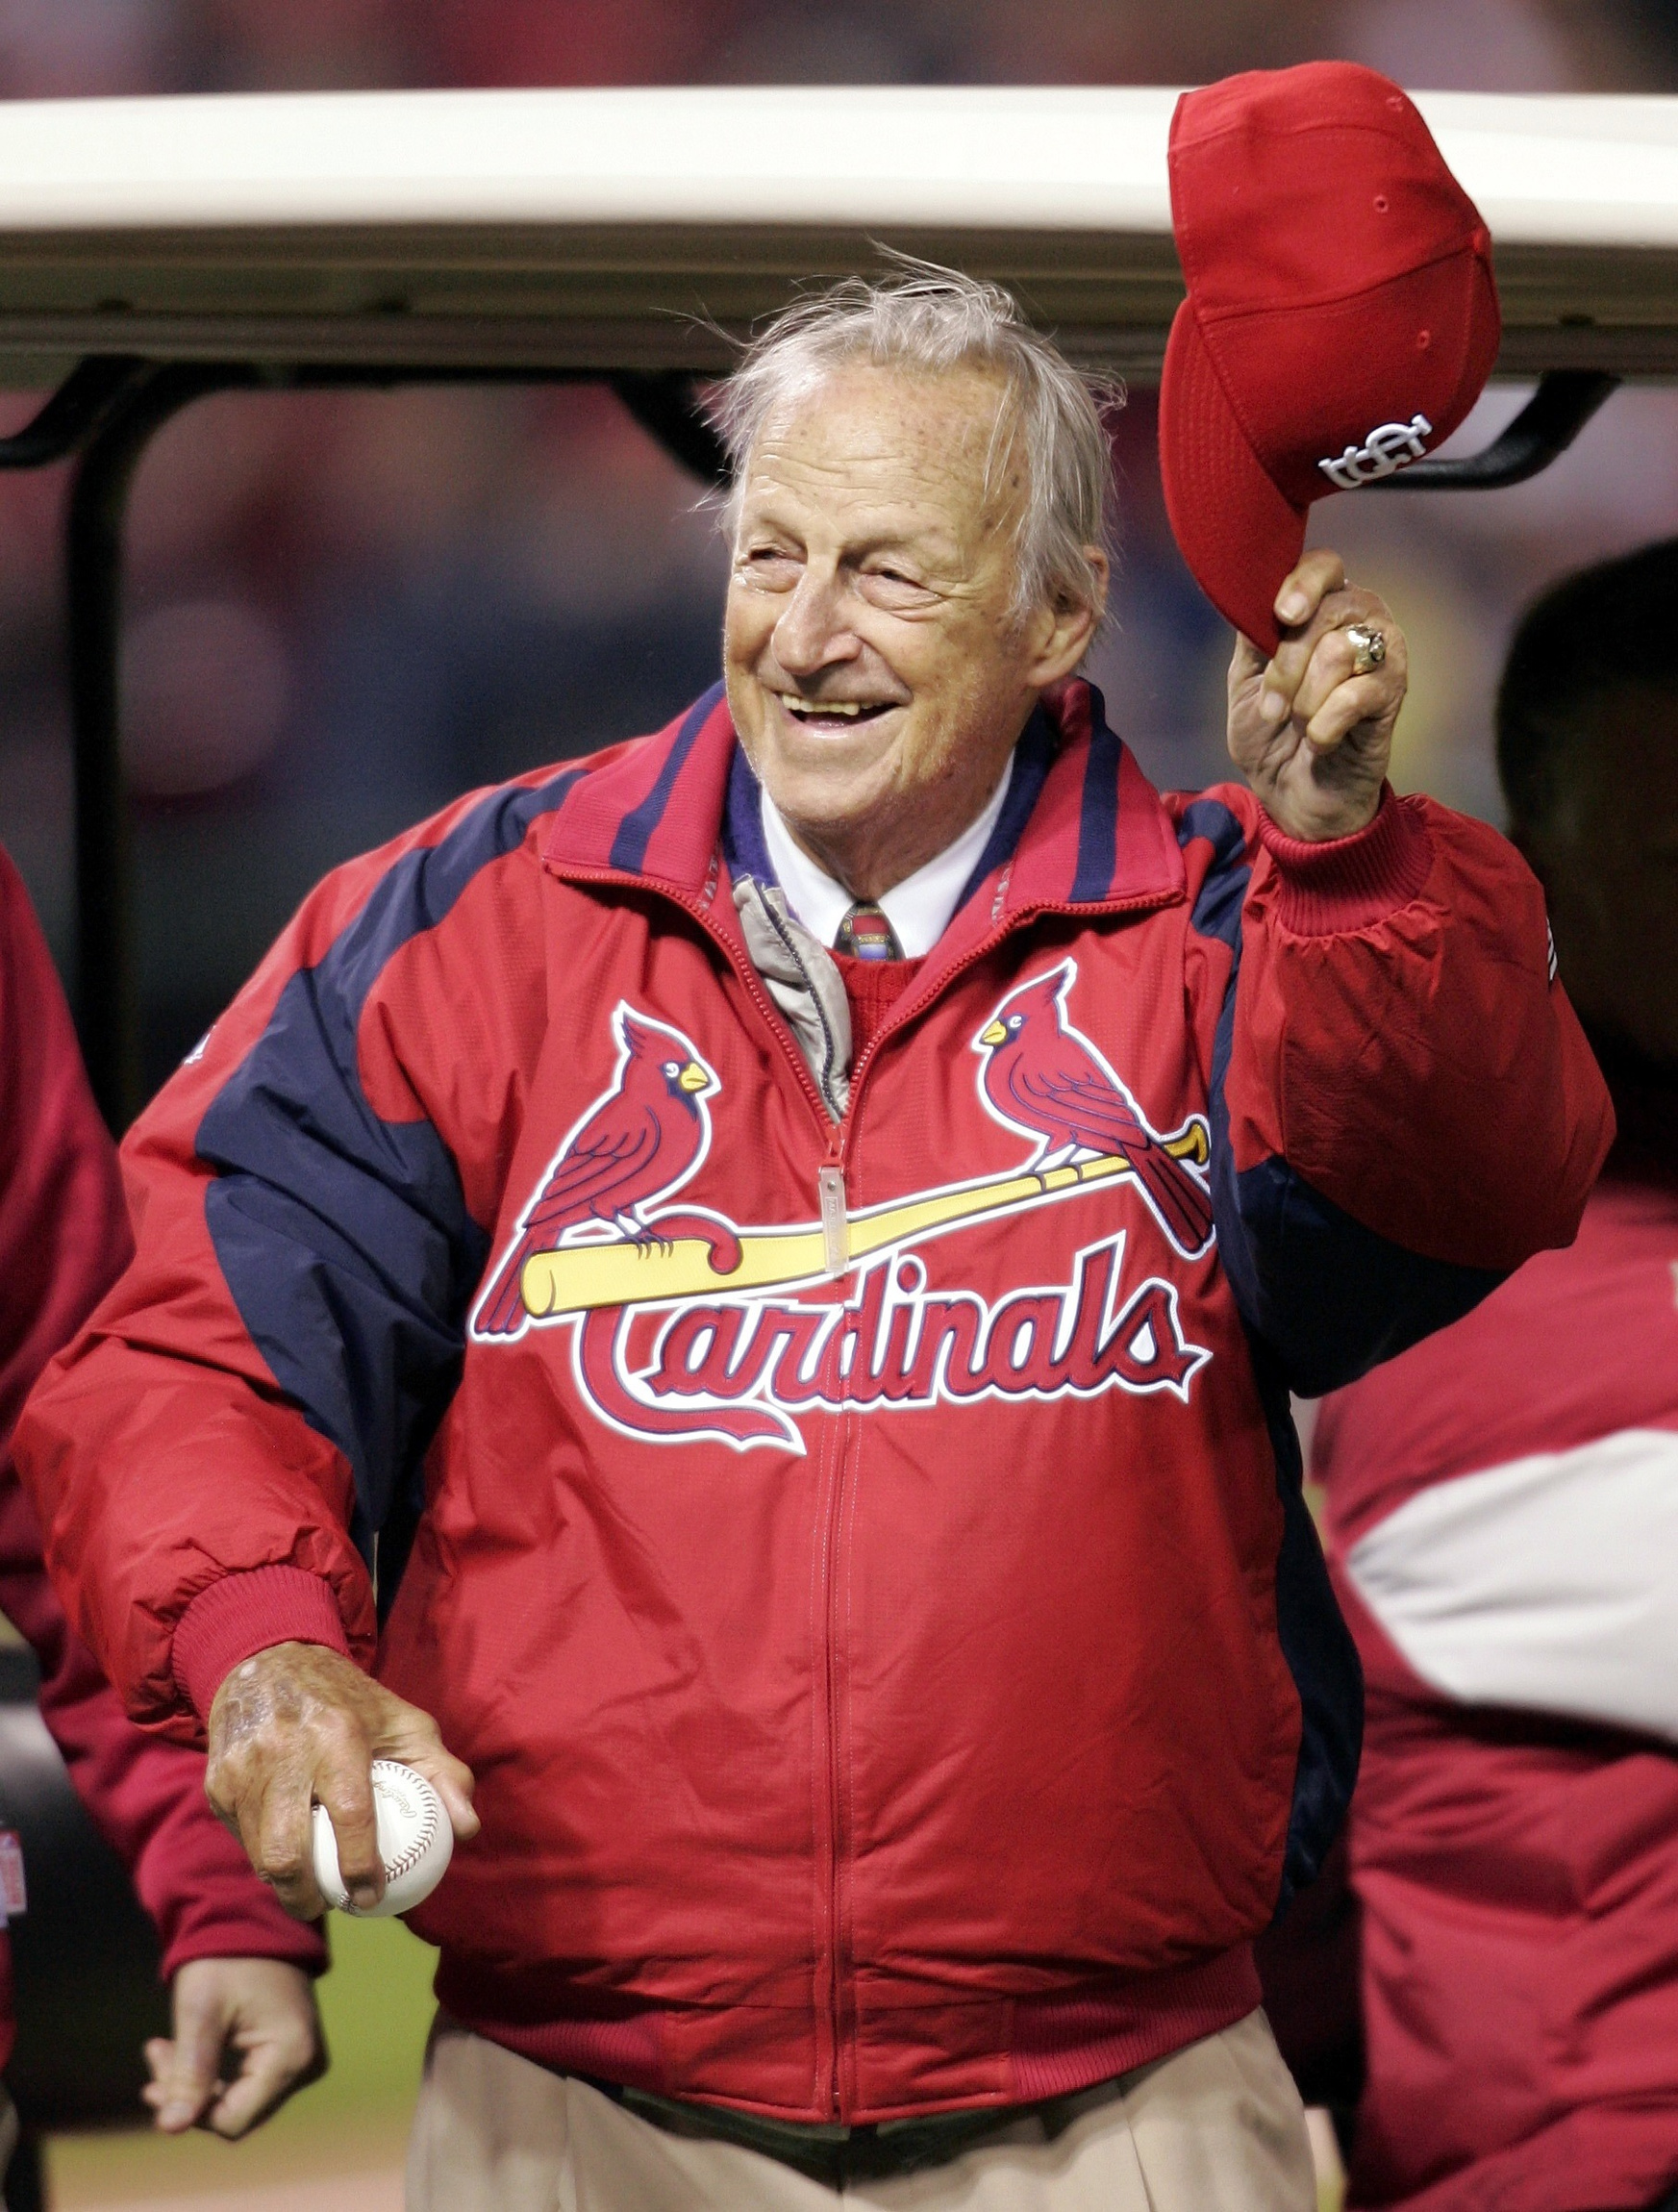 St. Louis Cardinal baseball Hall of Famer Stan Musial tips his hat to the crowd before he throws out the ceremonial first pitch prior to the start of 2006 World Series in St Louis. Musial, a Catholic, died Jan. 19 at age 92. He was awarded the Medal of F reedom in 2011 by President Barack Obama and over the years was supportive of charities of the Archdiocese of St. Louis. (CNS photo/John Sommers II, Reuters)